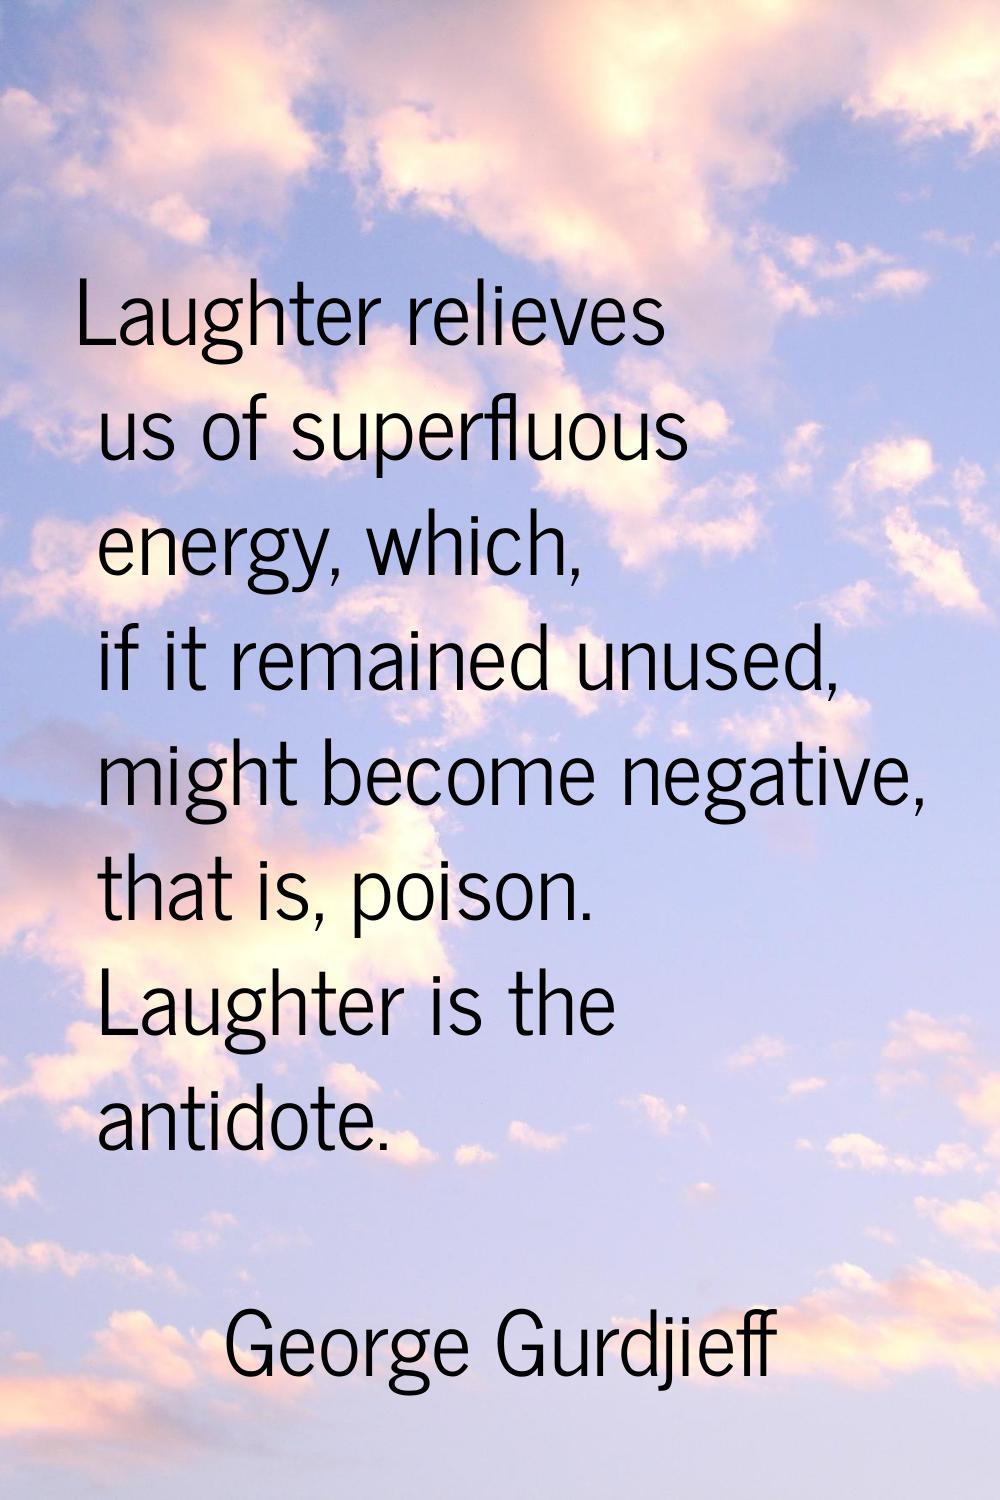 Laughter relieves us of superfluous energy, which, if it remained unused, might become negative, th